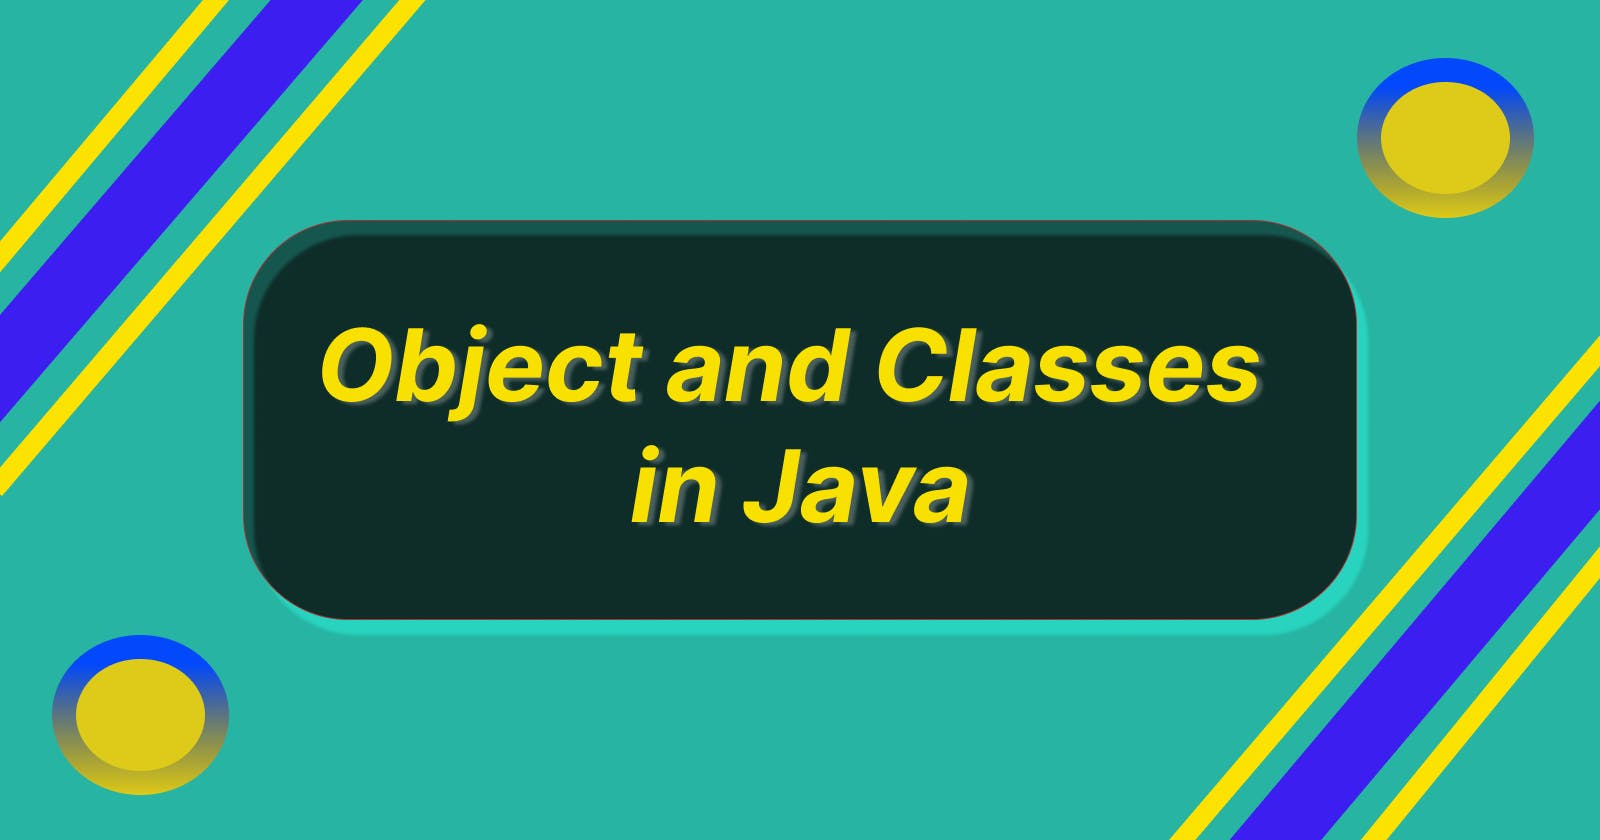 Objects and Classes in Java Language